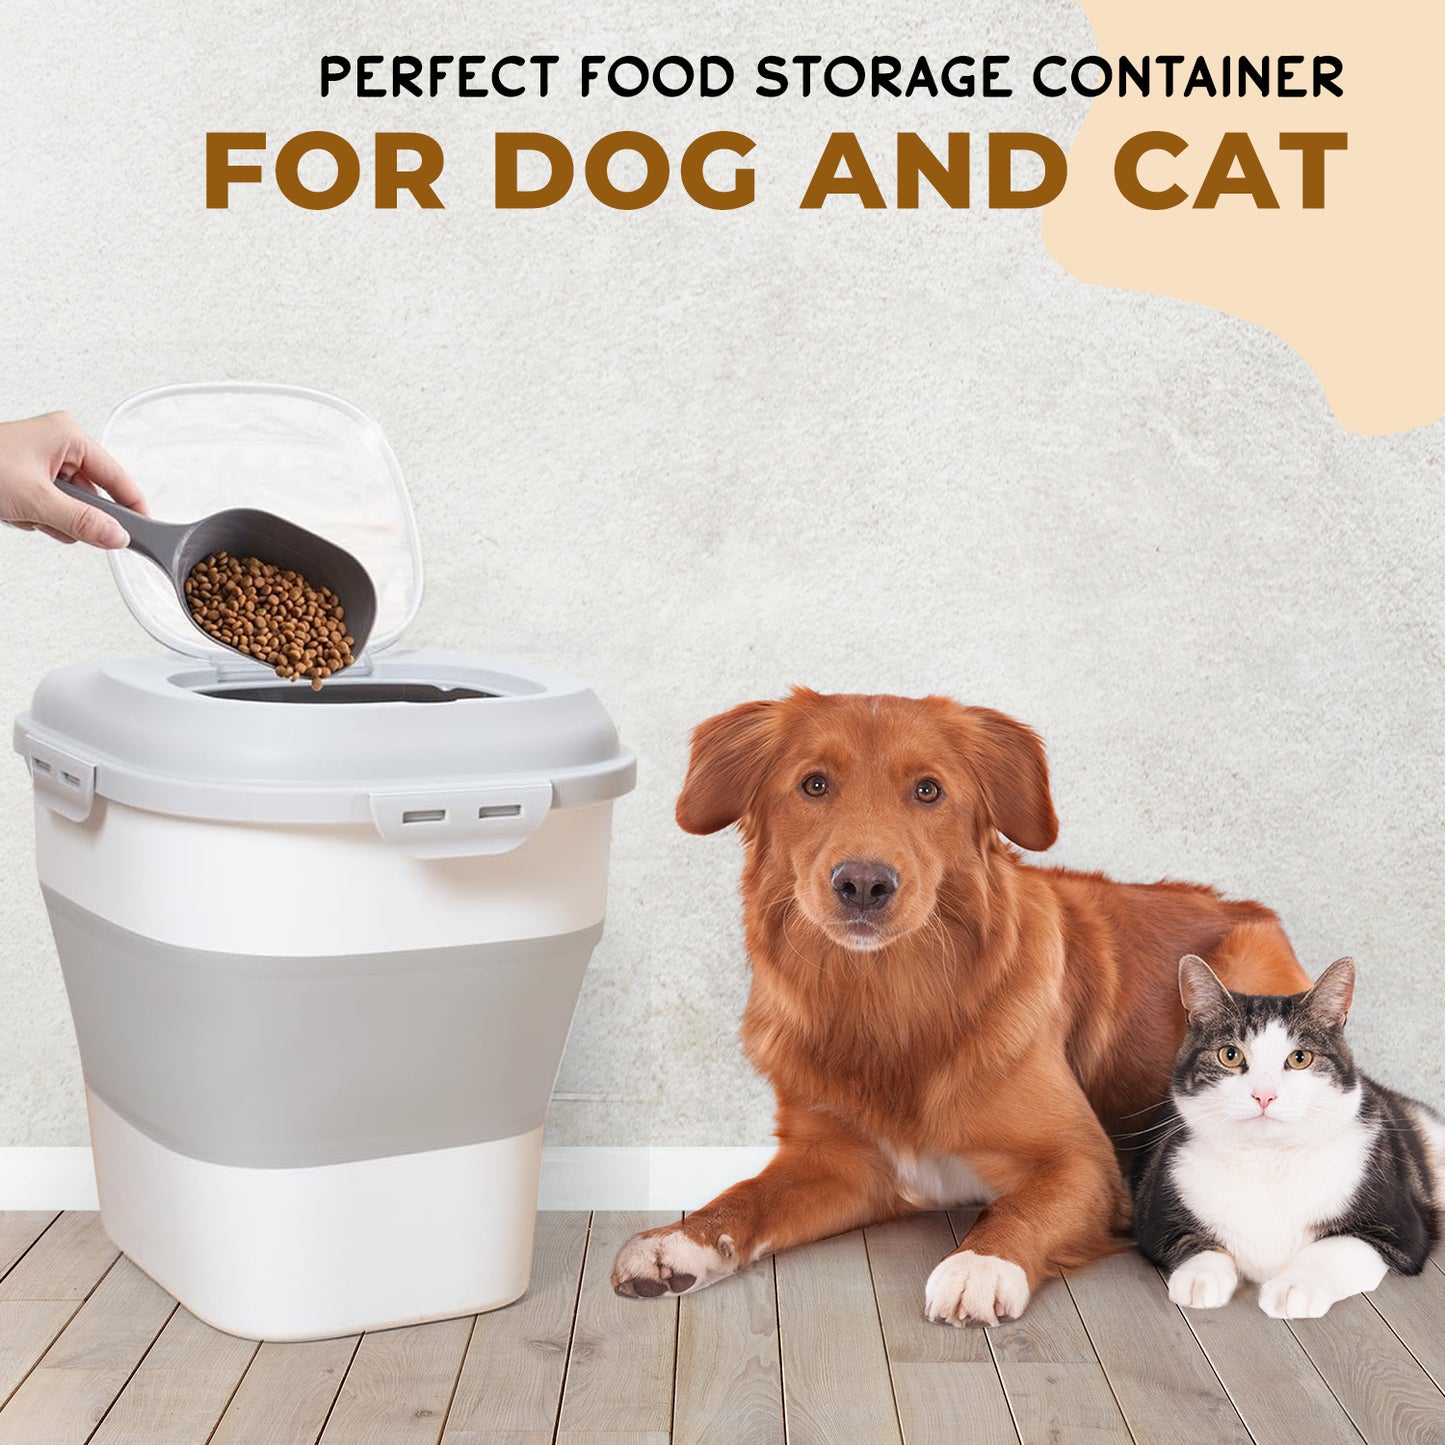 25L Capacity Rice Cereal Collapsible Storage Dispenser with Transparent Lid, Rolling Wheels, Measuring Cup and Scoop, Dog Cat Pet Food Storage Container